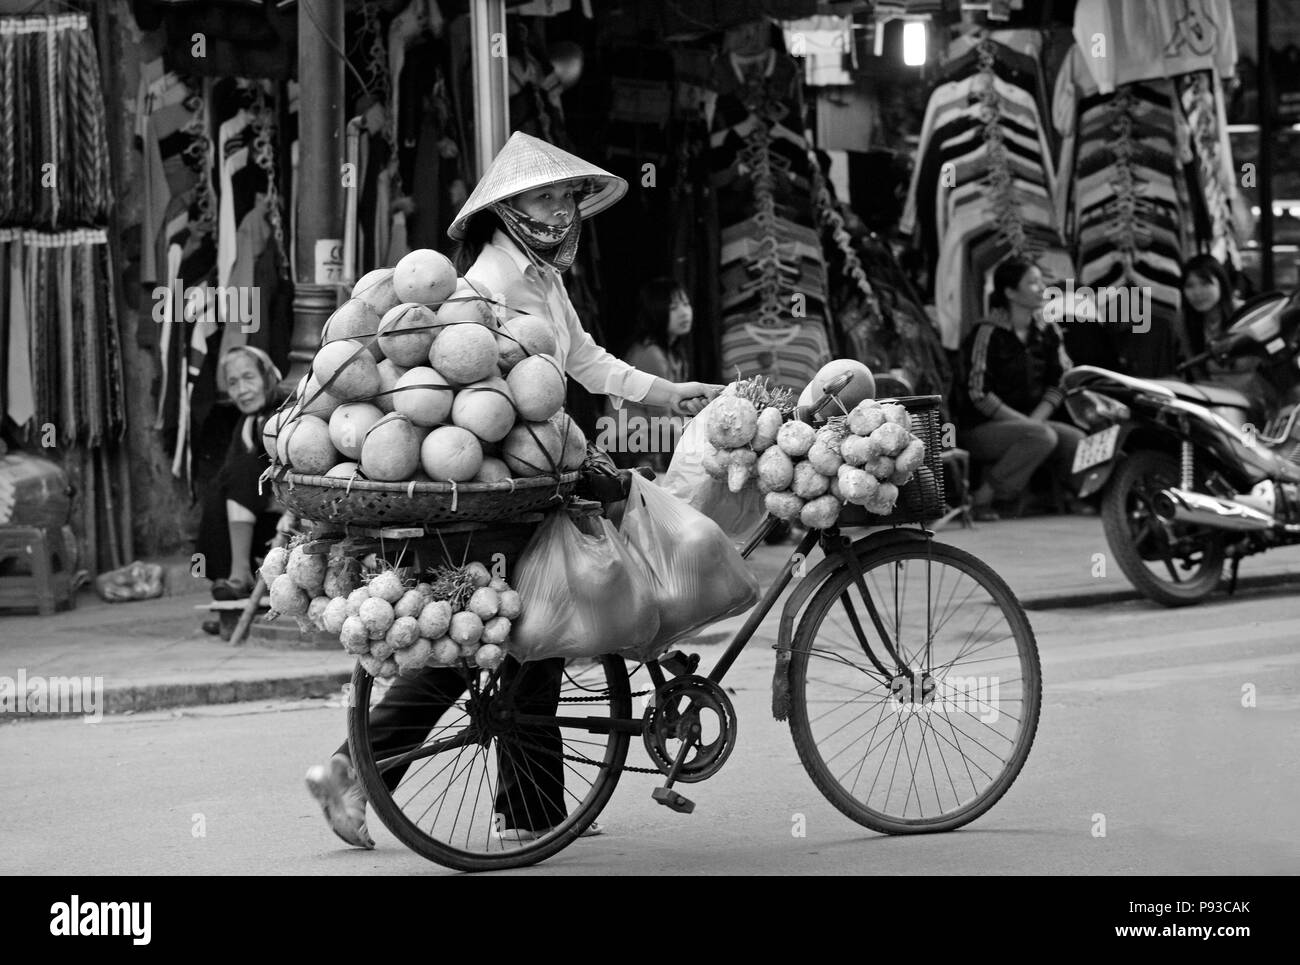 A mobile fruit and vegetable merchant transports his product via bicycle - HANOI, VIETNAM Stock Photo